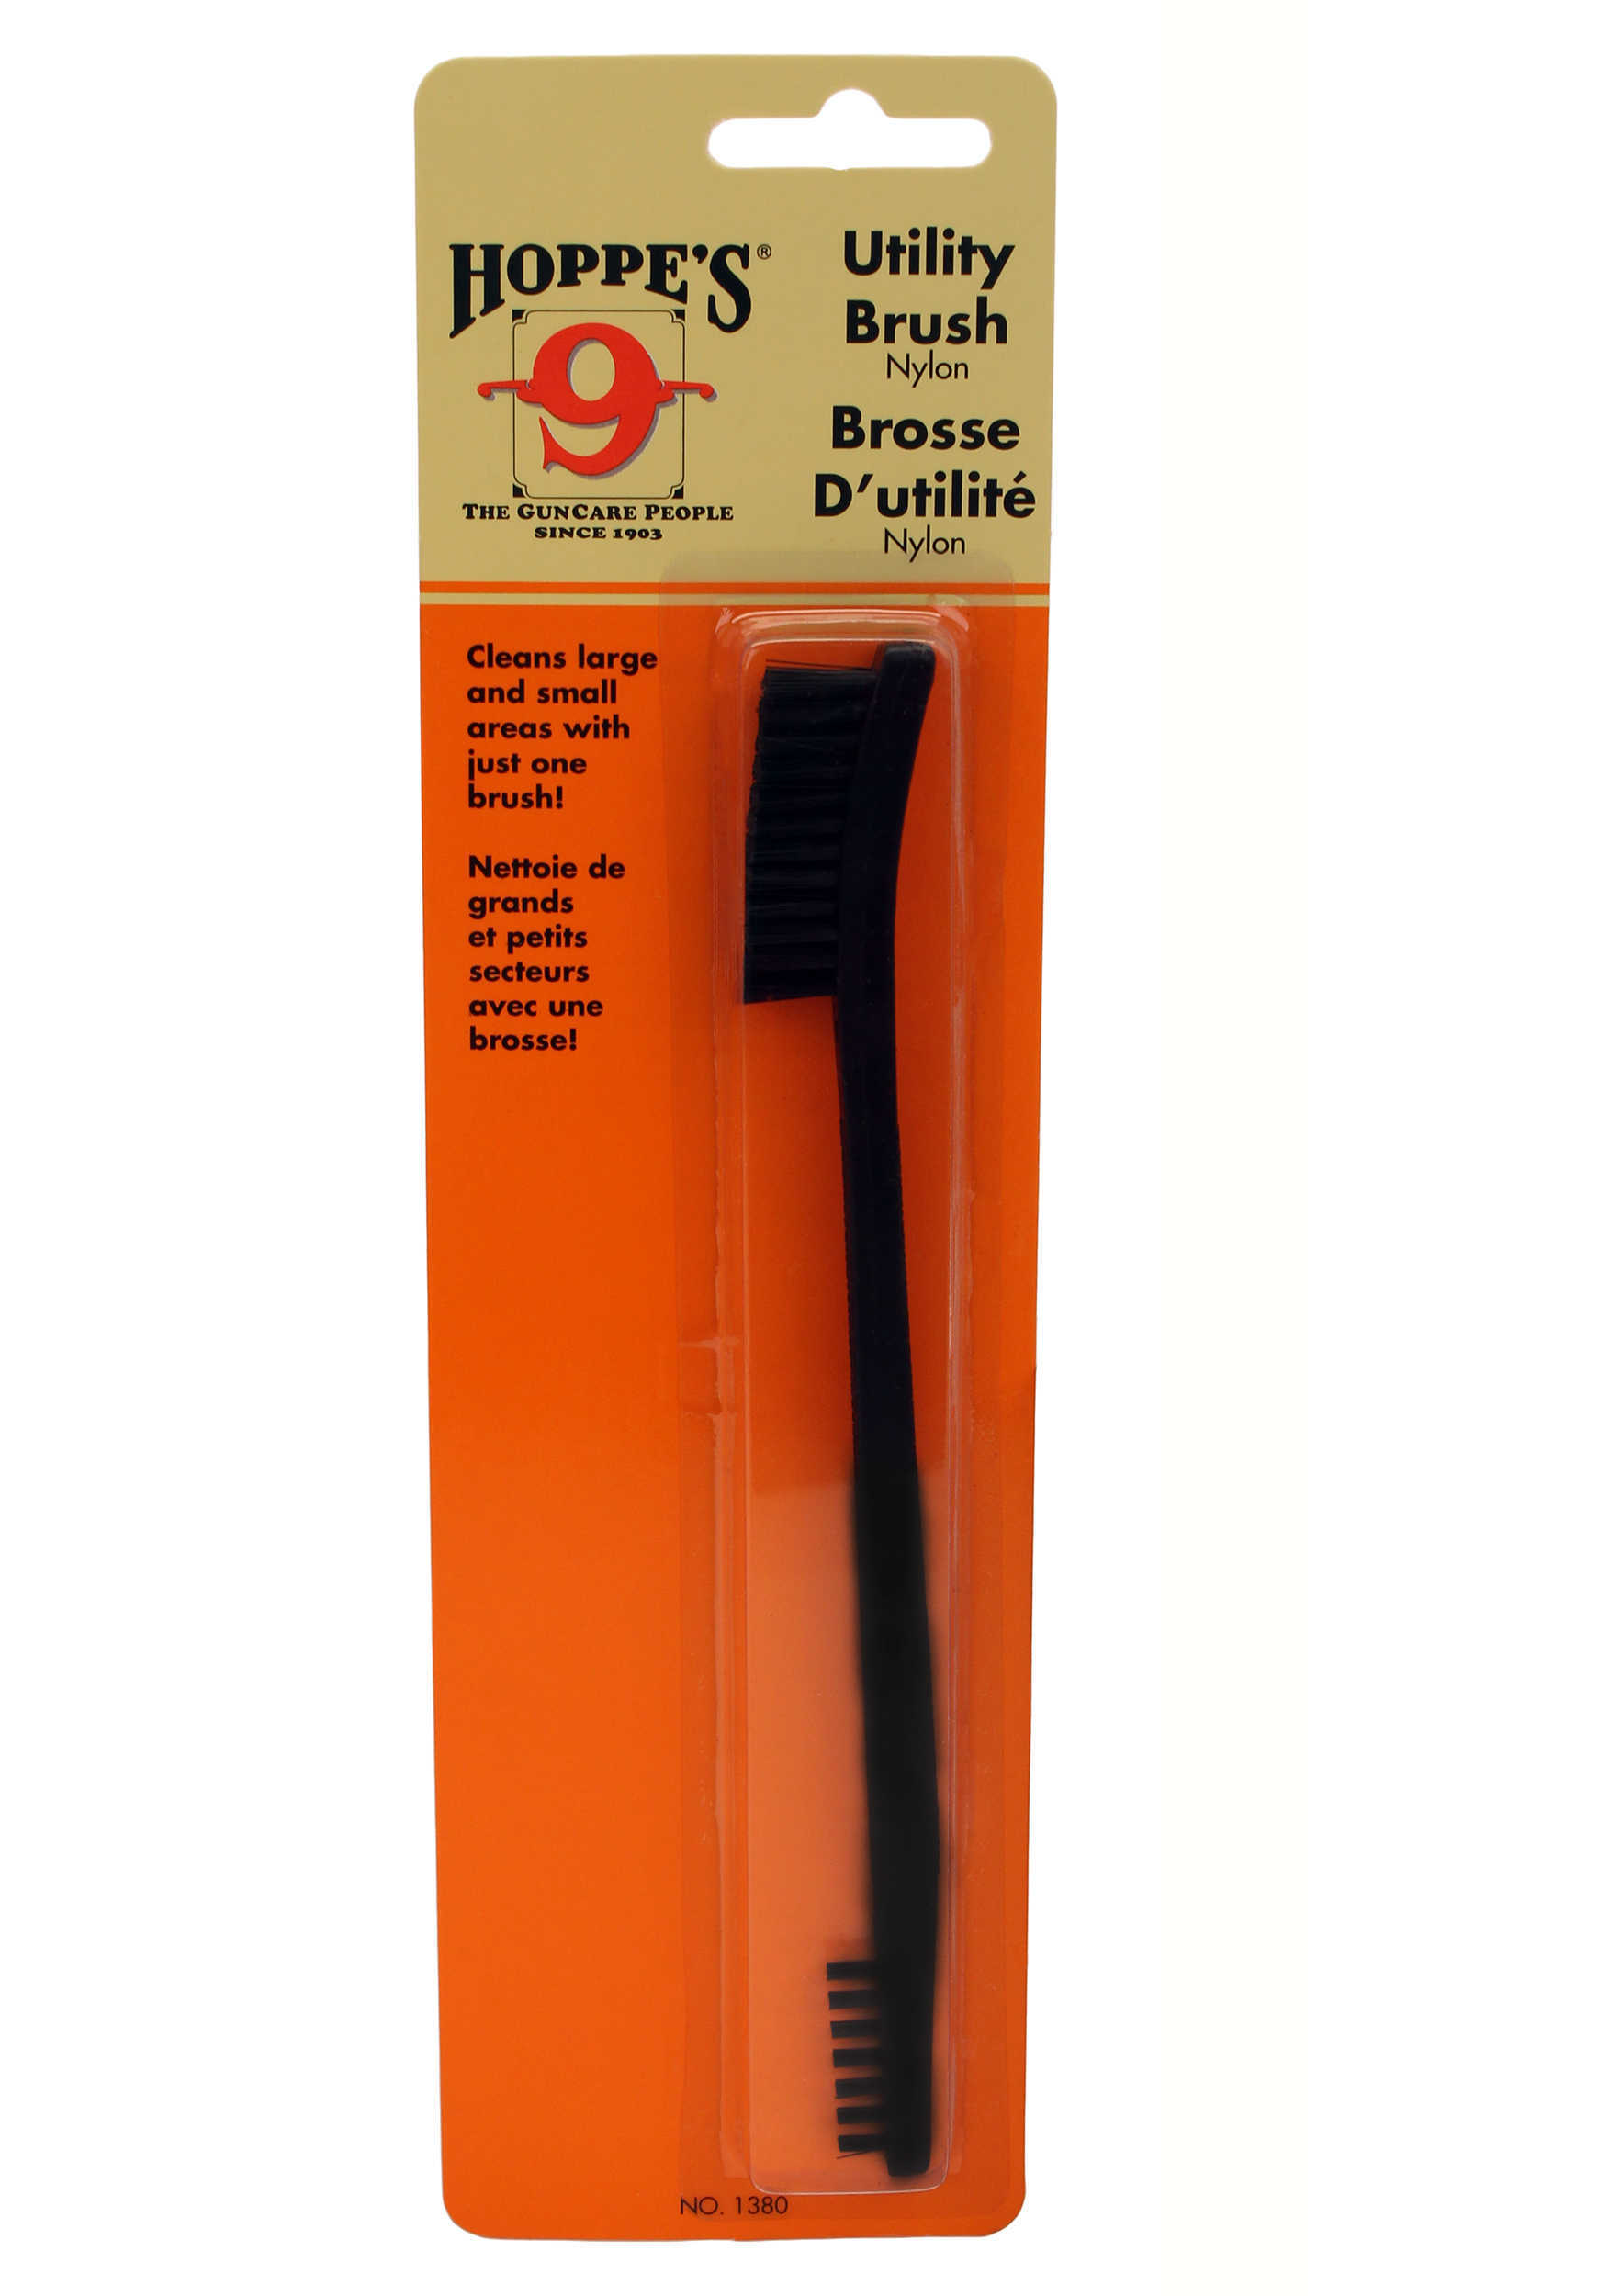 Hoppes Nylon Utility Brush One End Has Traditionally-Sized bristles While The Other smaller For Getting In